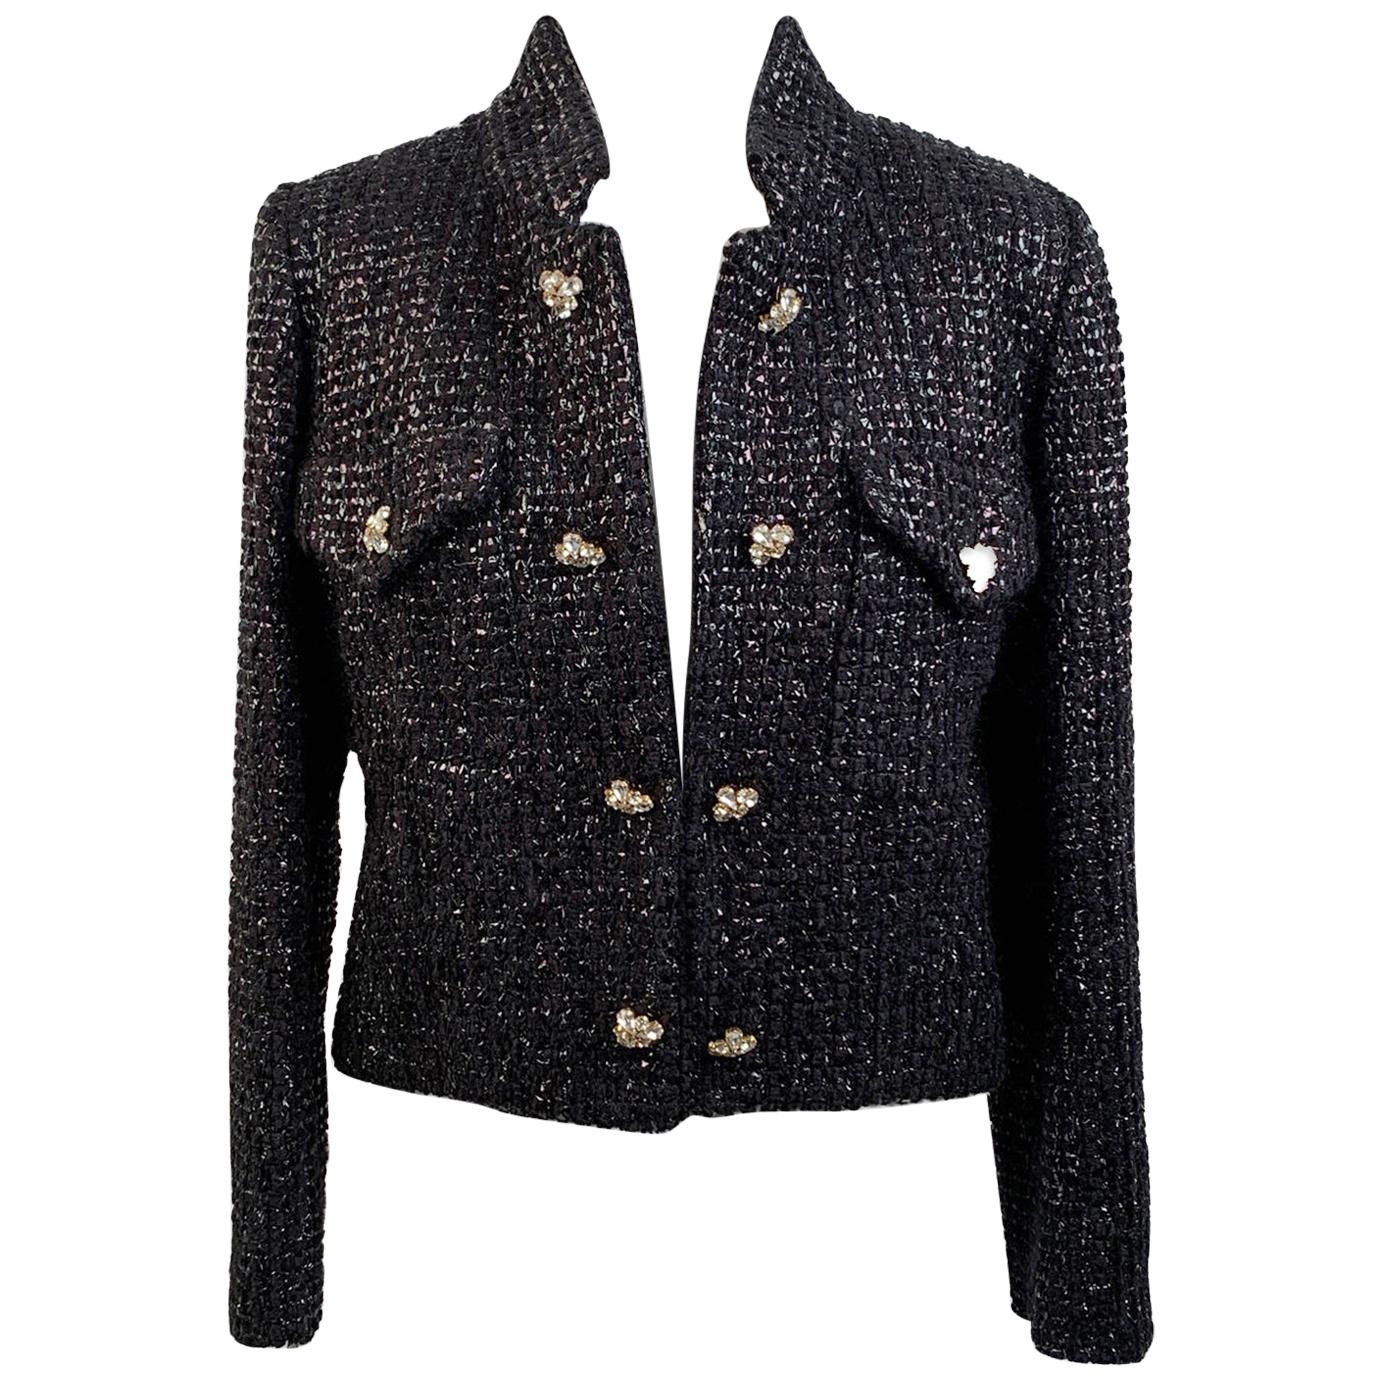 Moschino Vintage Black Tweed Jacket with Jeweled Buttons Size 44